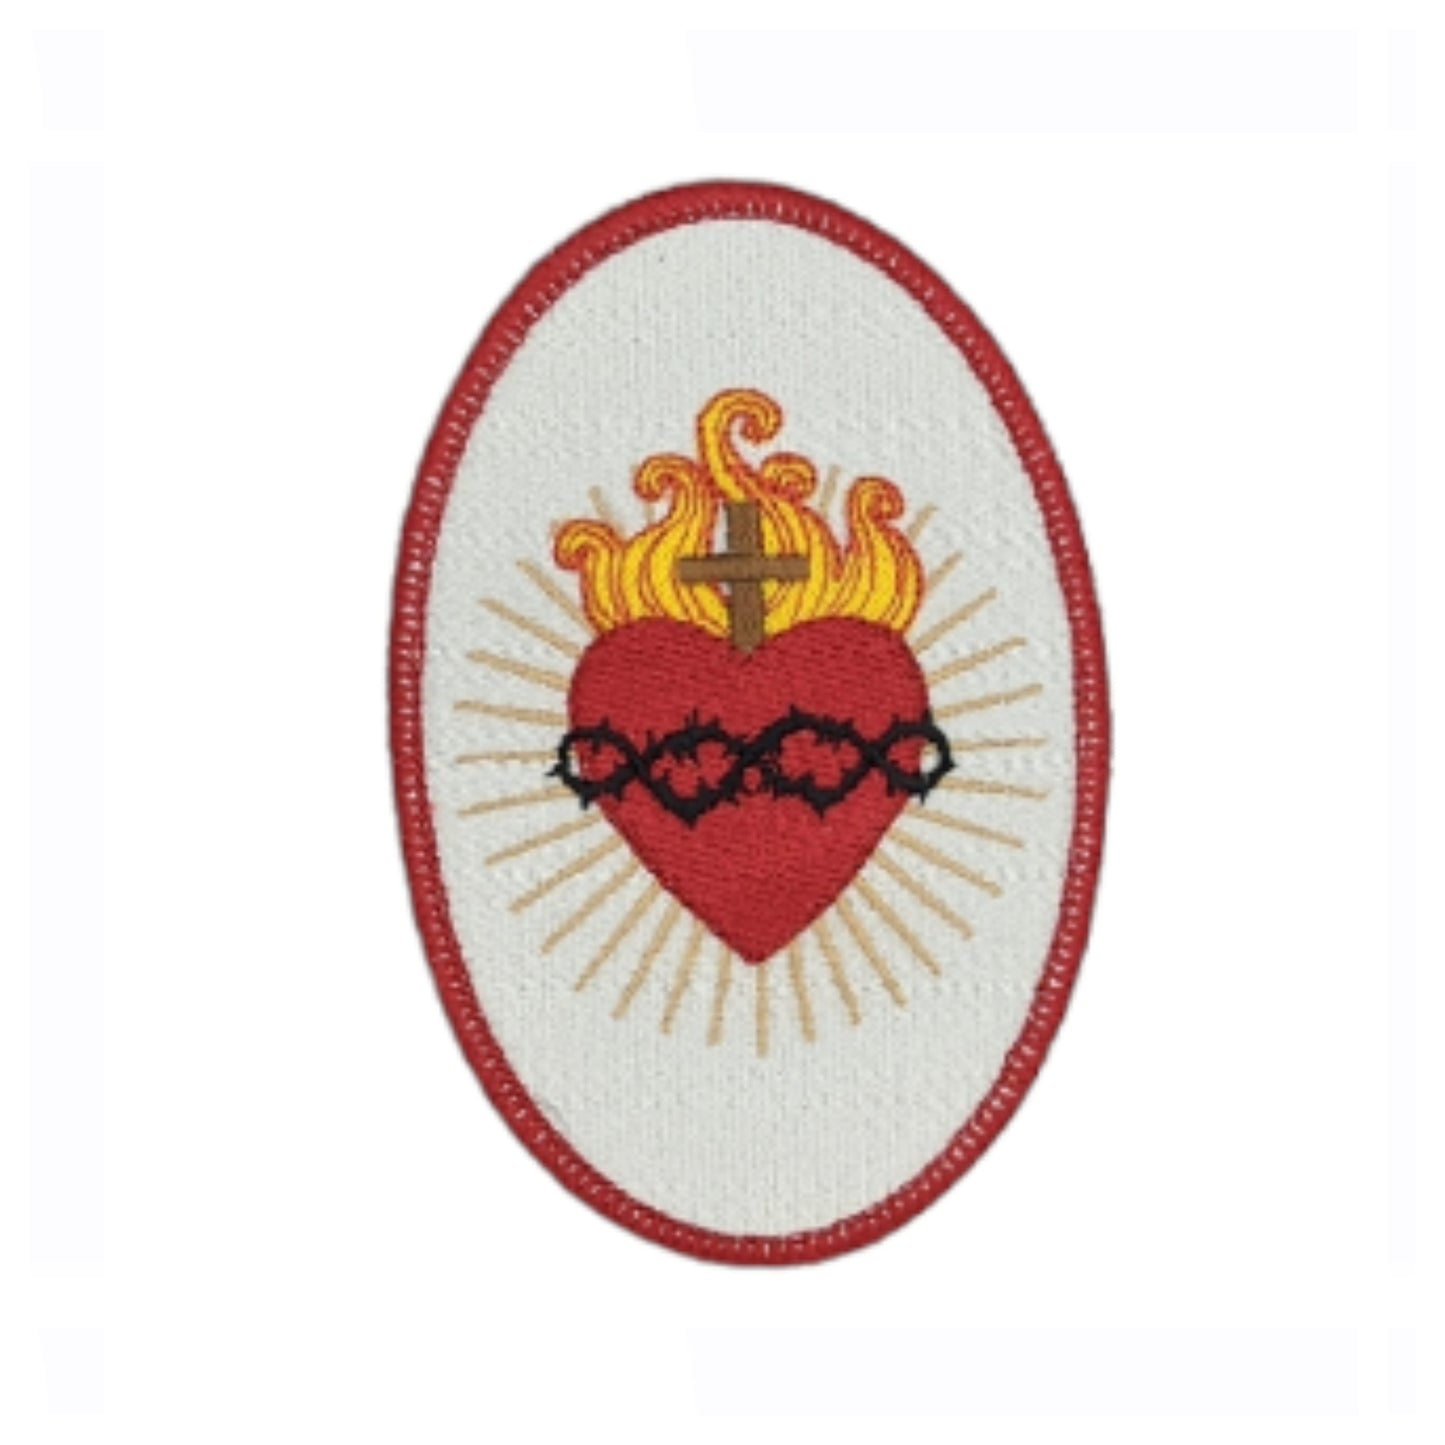 Sacred Heart badge, religious patch, iron on badge, sew on patch, embroidered badge, embroidered patch, Sacred Heart of Jesus, pilgrimage